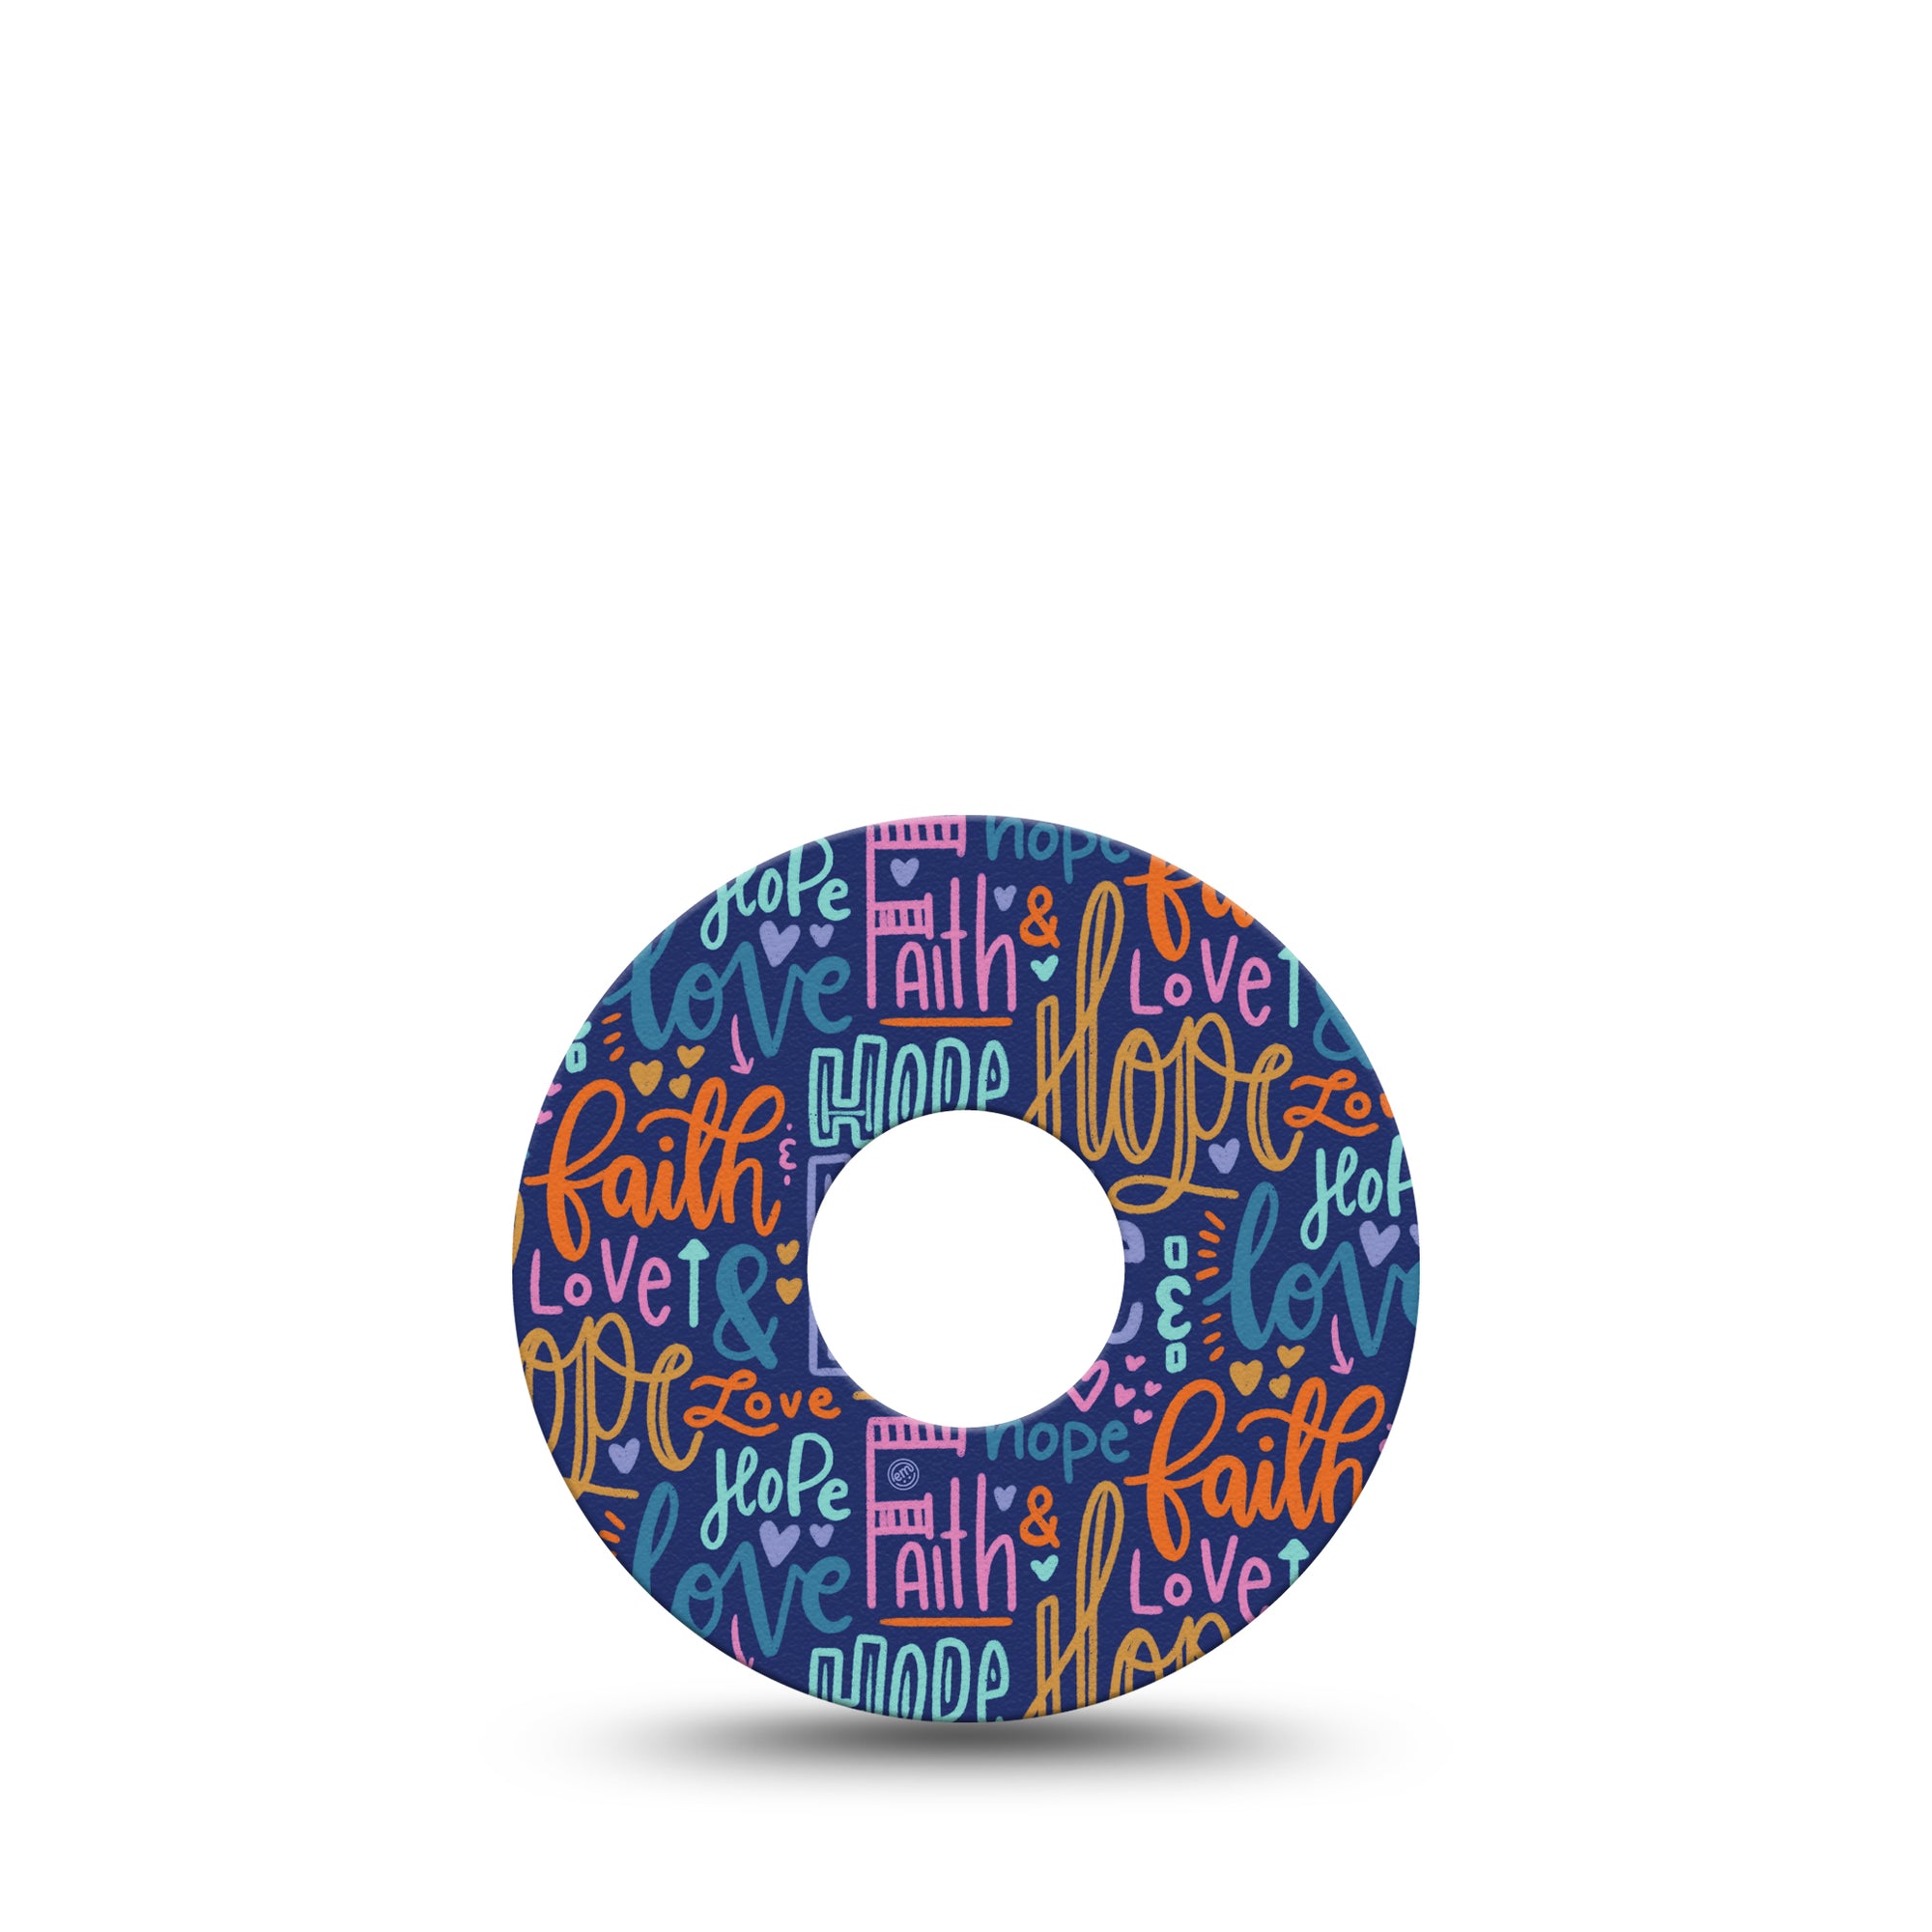 ExpressionMed Faith Love Hope Libre 3 Tape, Colorful Inspiration Themed CGM Adhesive Patch Design